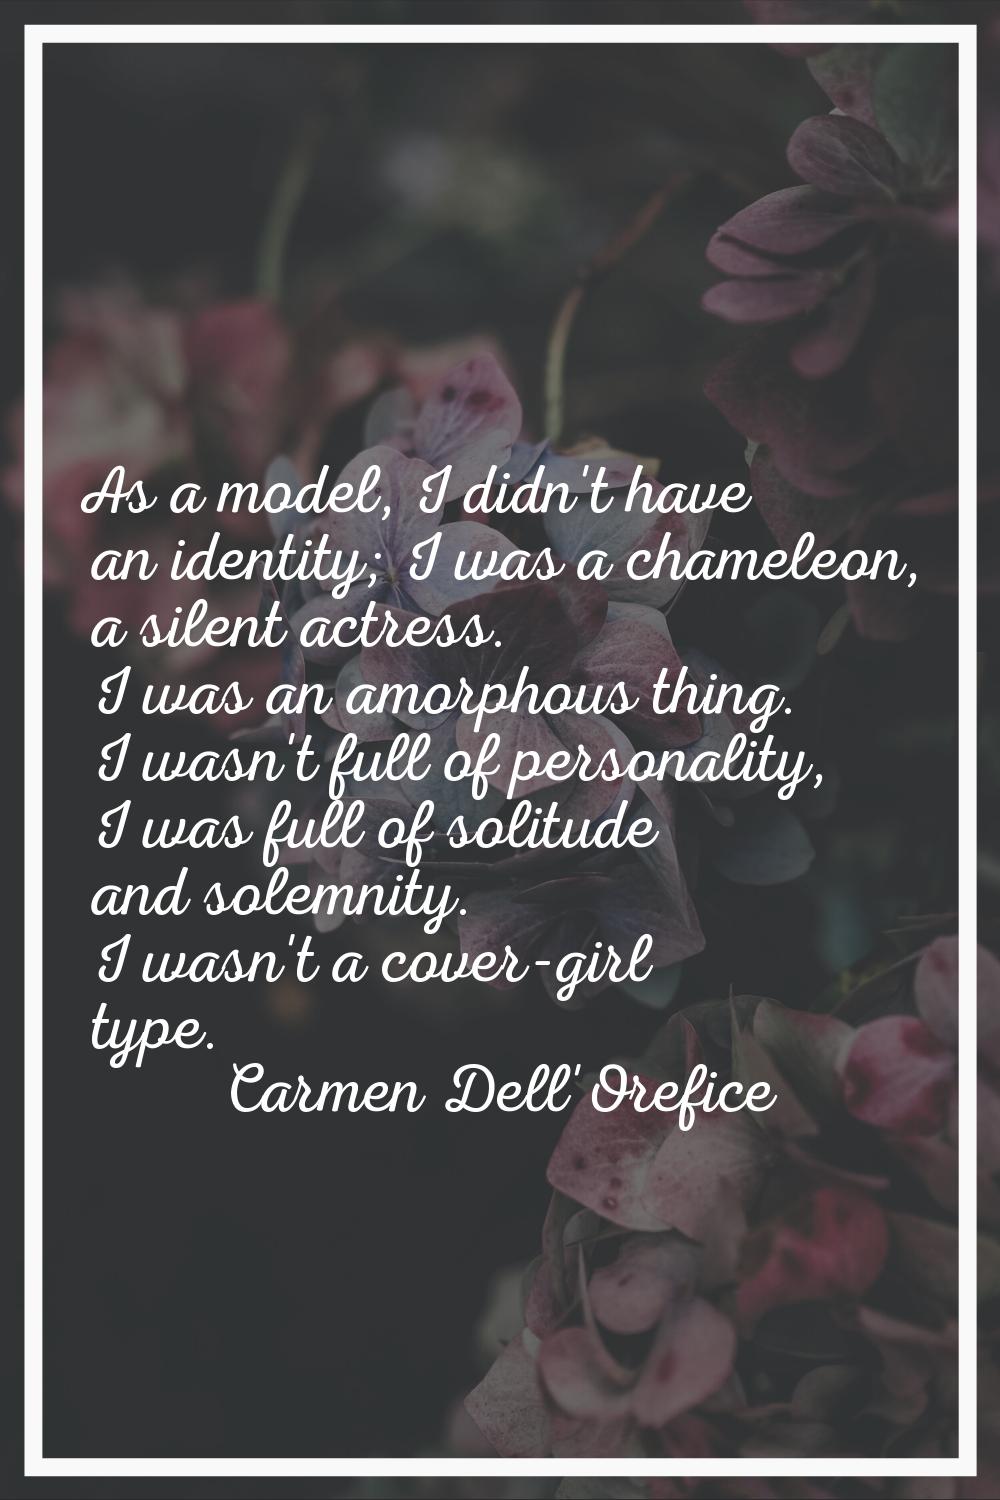 As a model, I didn't have an identity; I was a chameleon, a silent actress. I was an amorphous thin